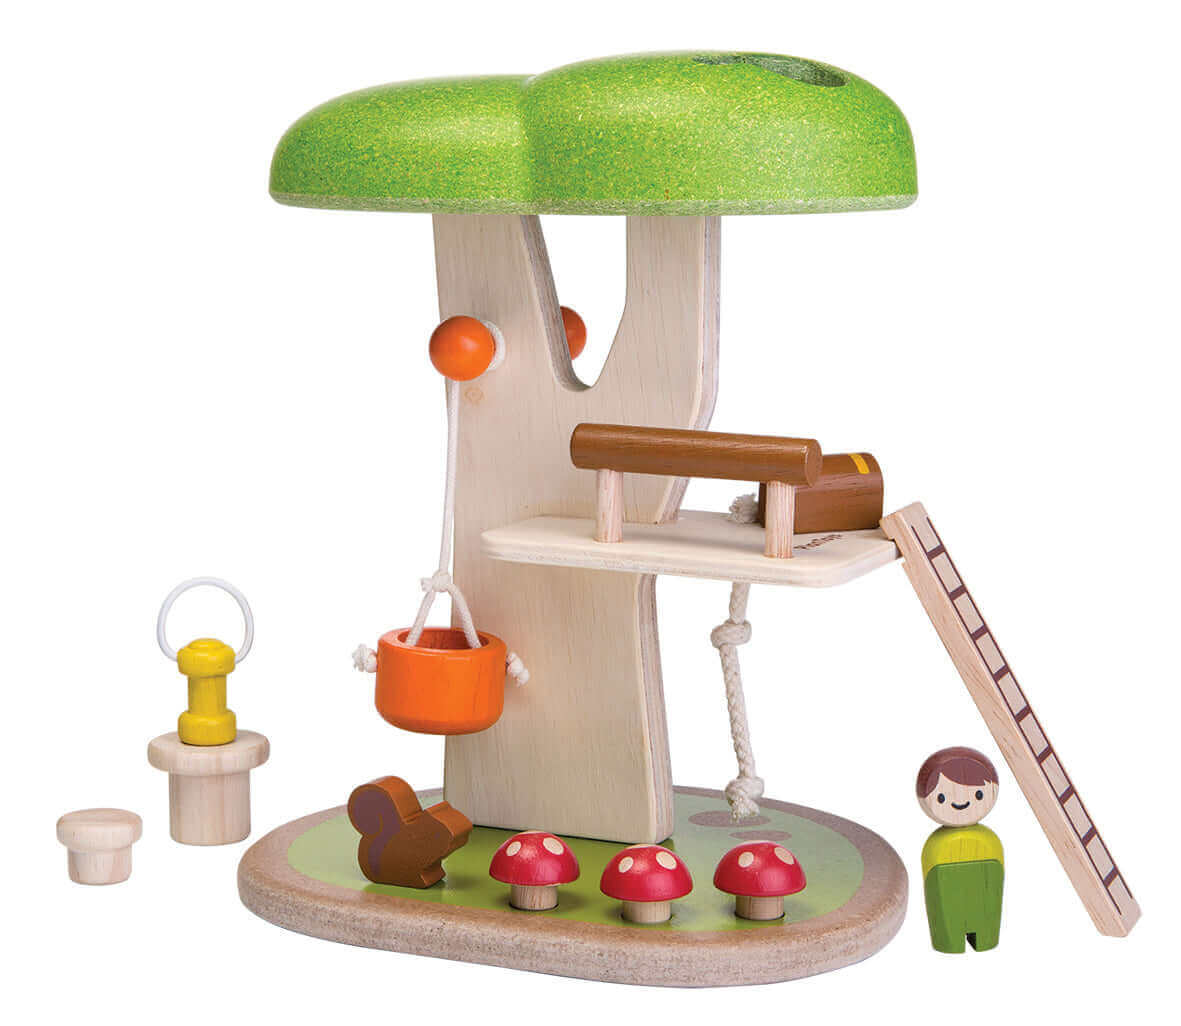 Construction Paper – Treehouse Toys